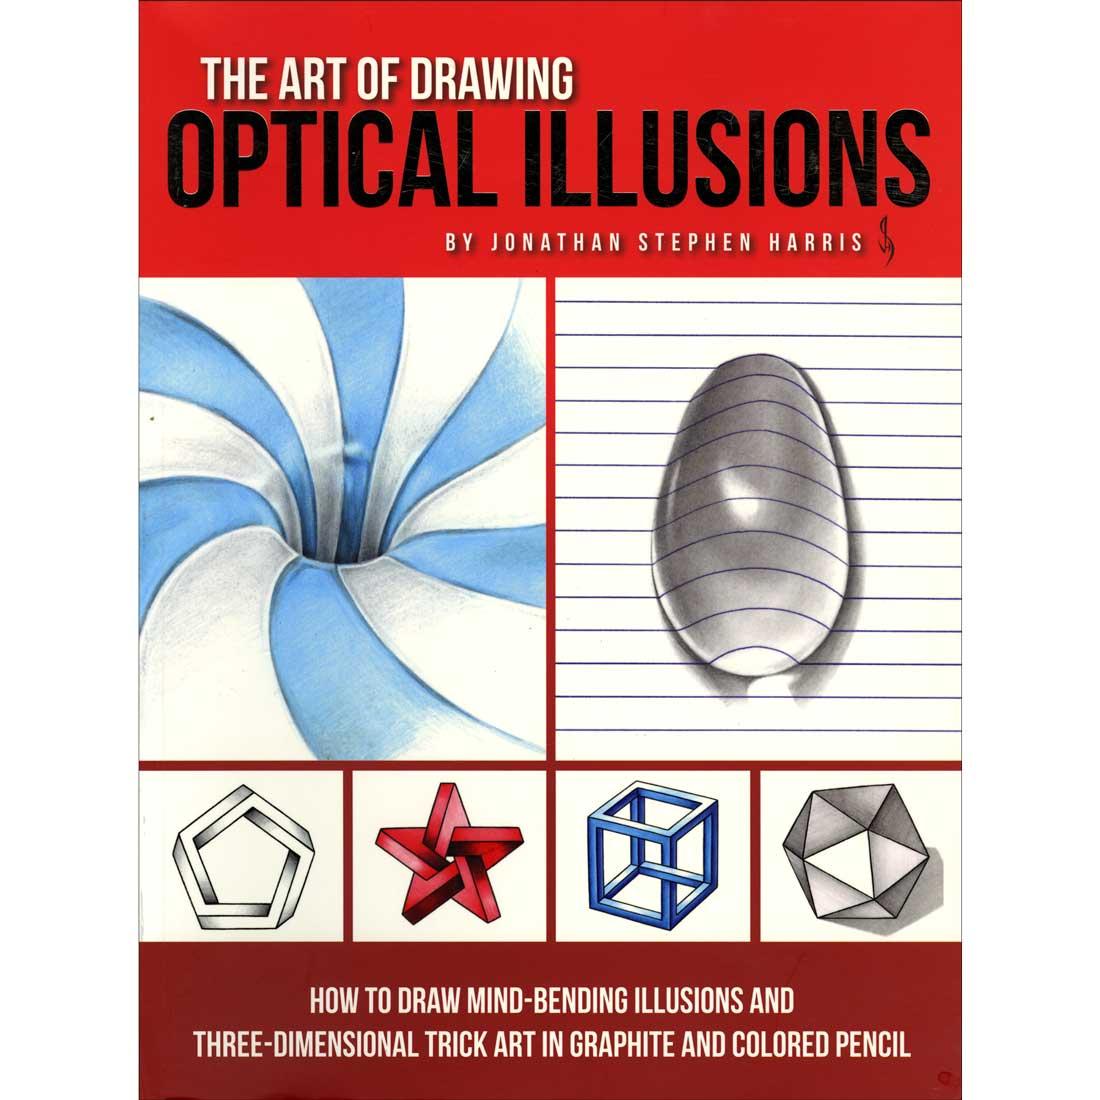 cover of book - The Art of Drawing Optical Illusions